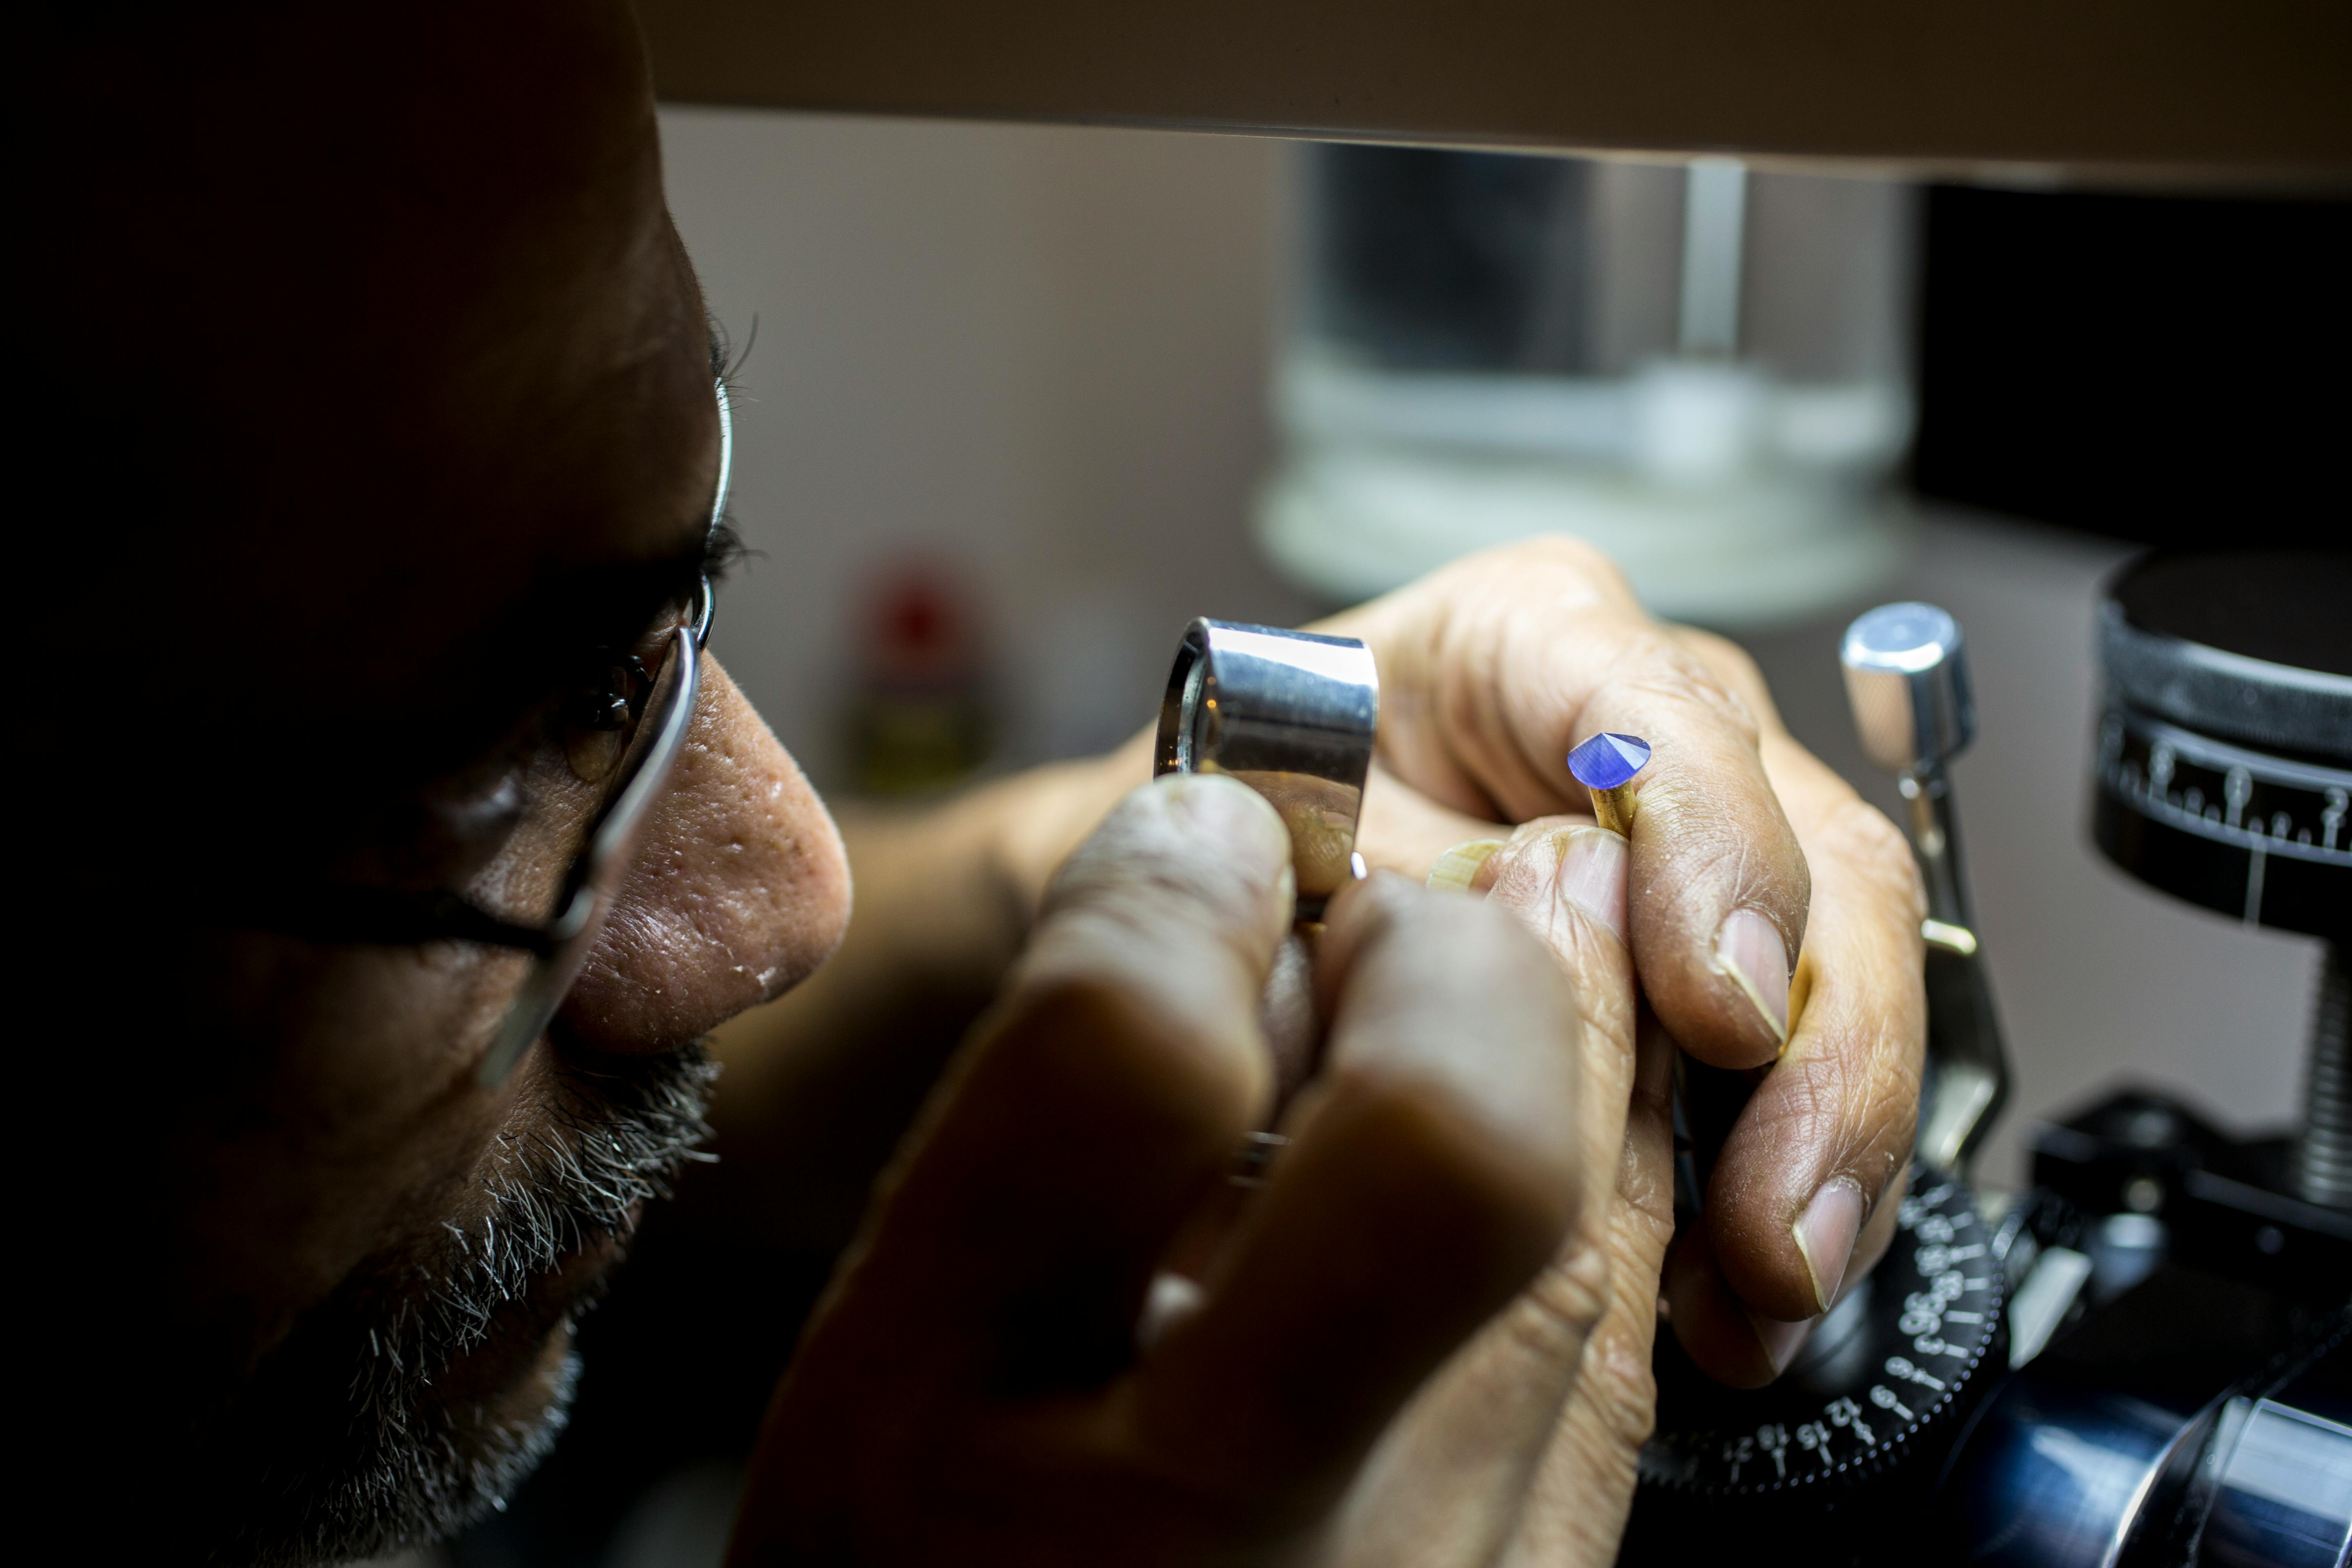 The expert starts examining the jewellery | Source: Pexels